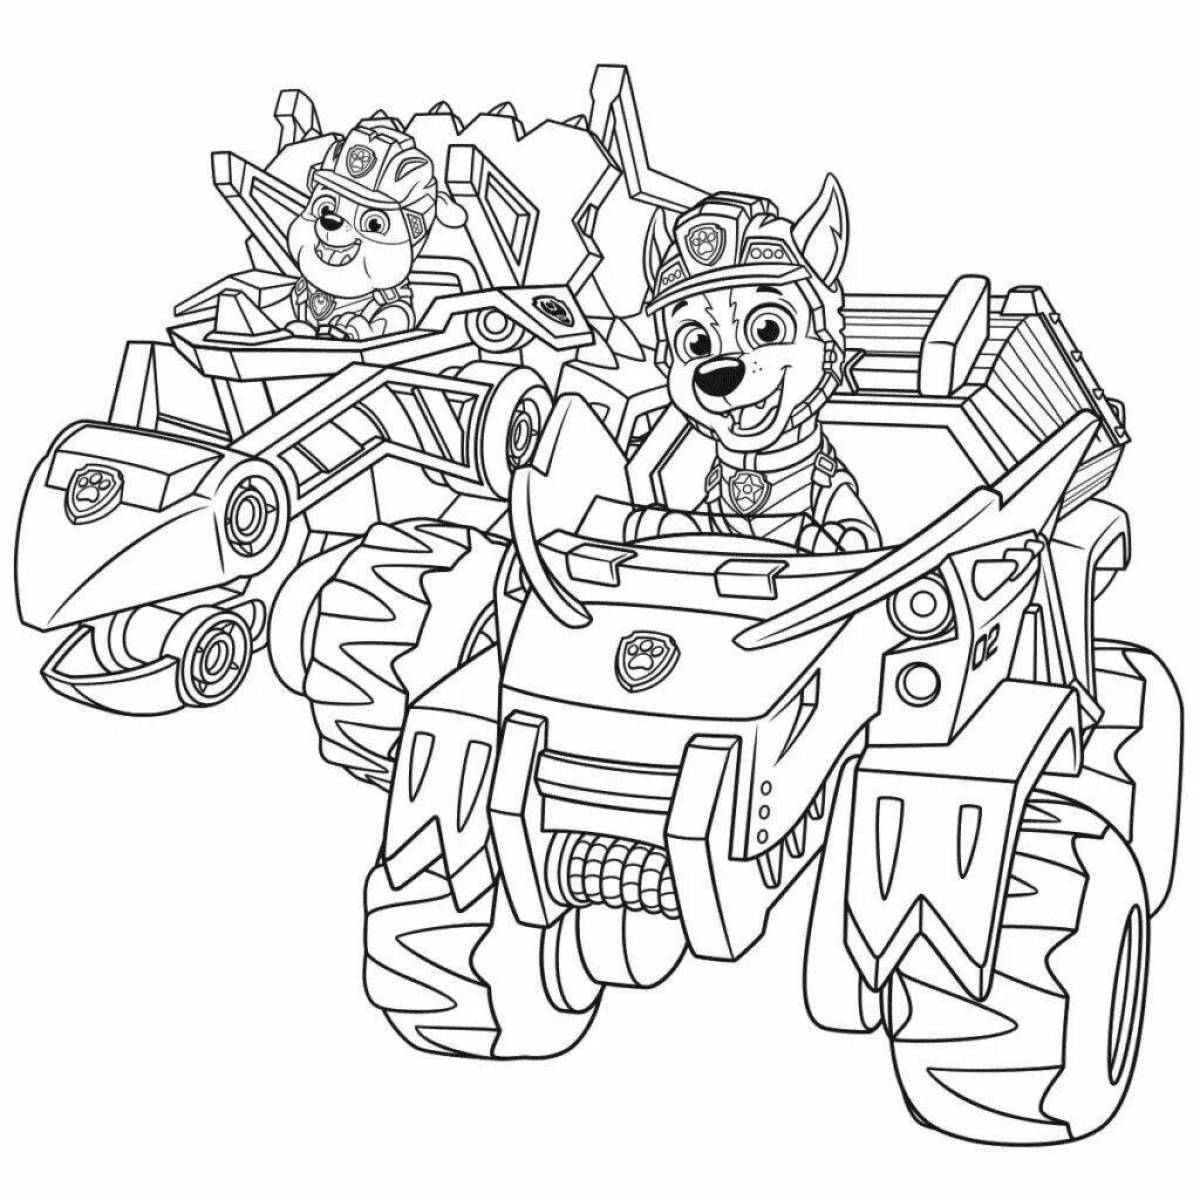 Fearless racer puppy coloring page